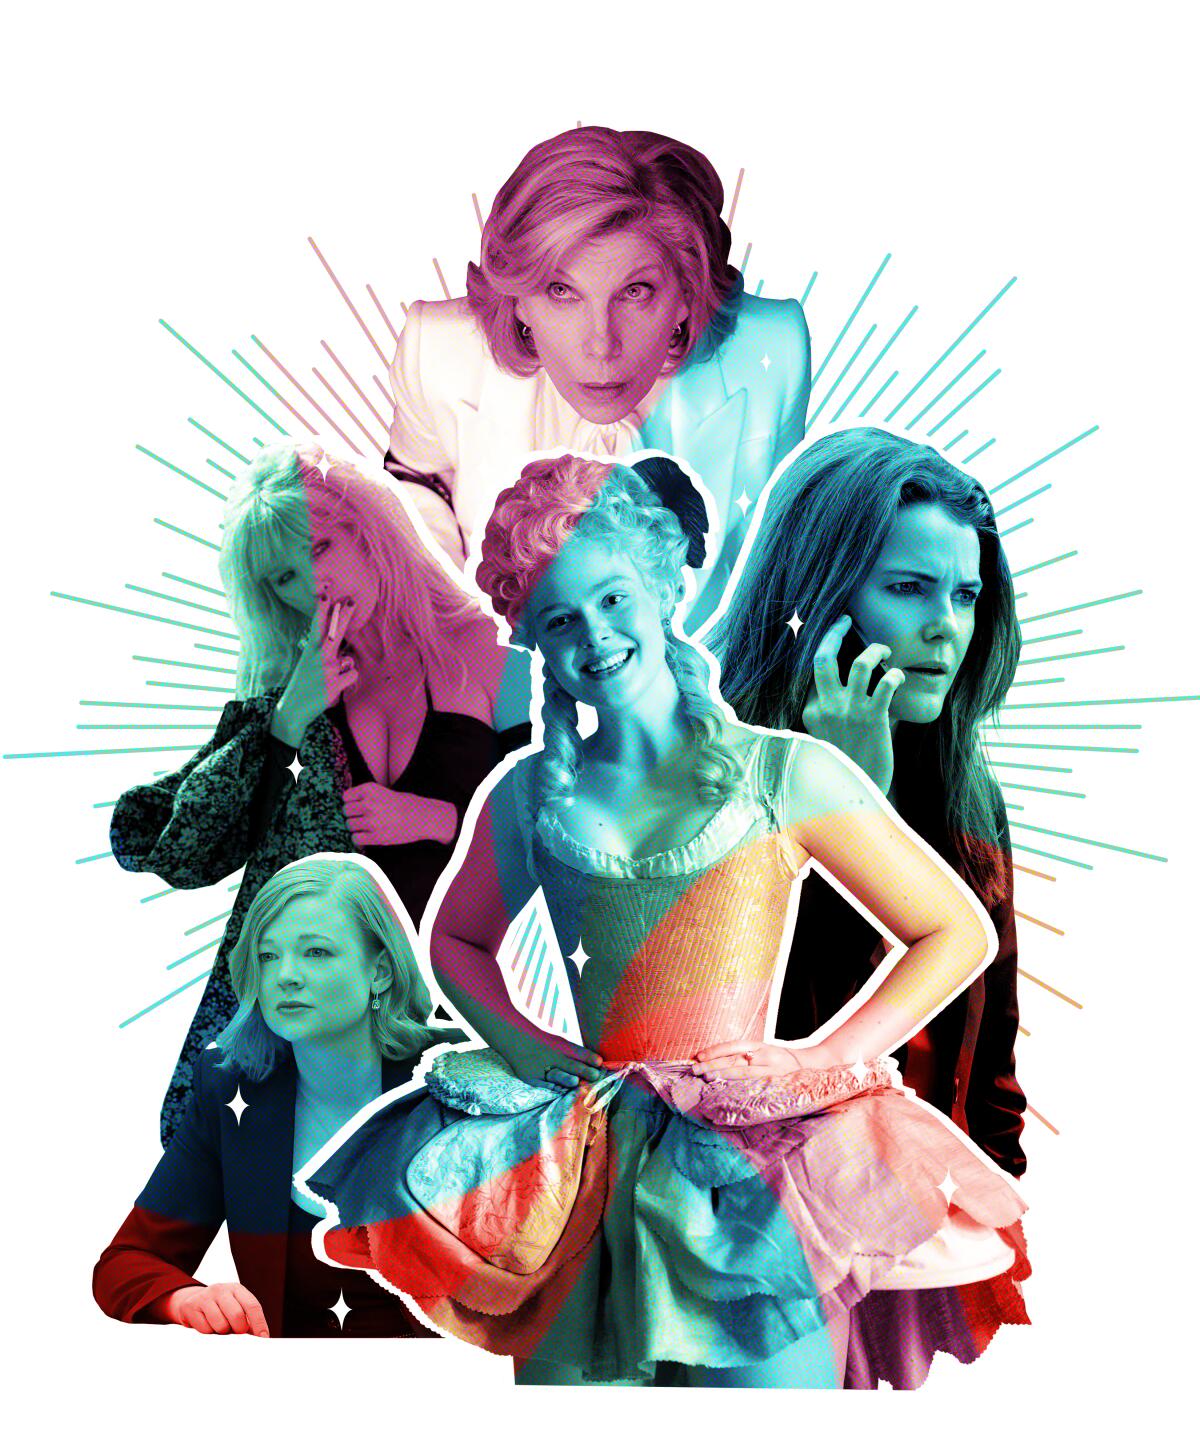 A collage of TV actors in character, including Christine Baranski, Keri Russell, Elle Fanning, Sarah Snook and Kelly Reilly